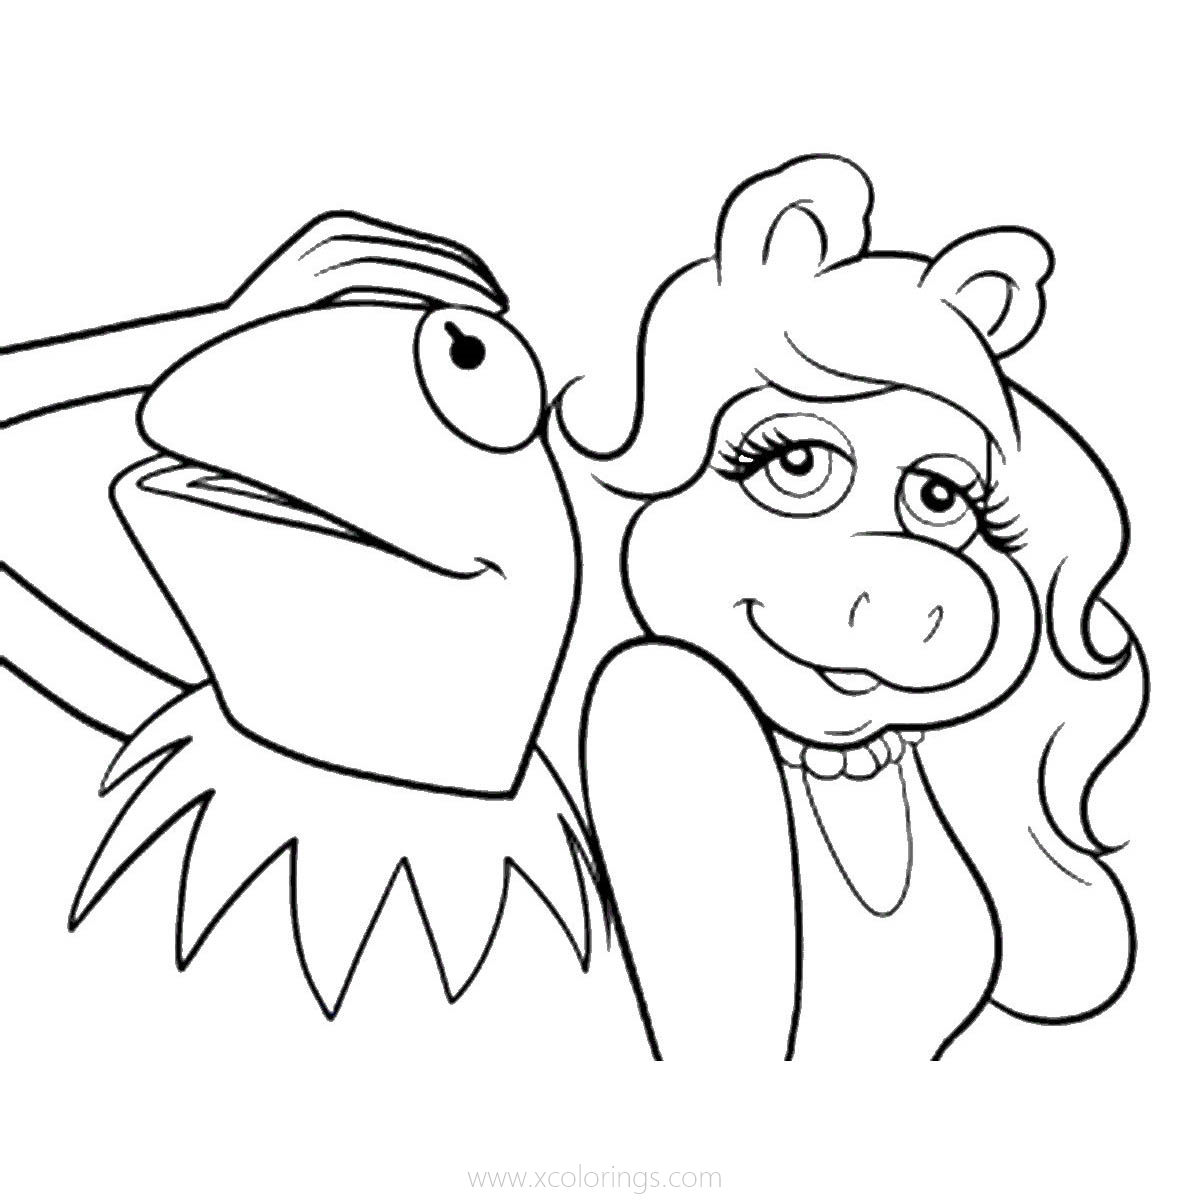 Free Miss Piggy and Kermit the Frog Coloring Pages printable